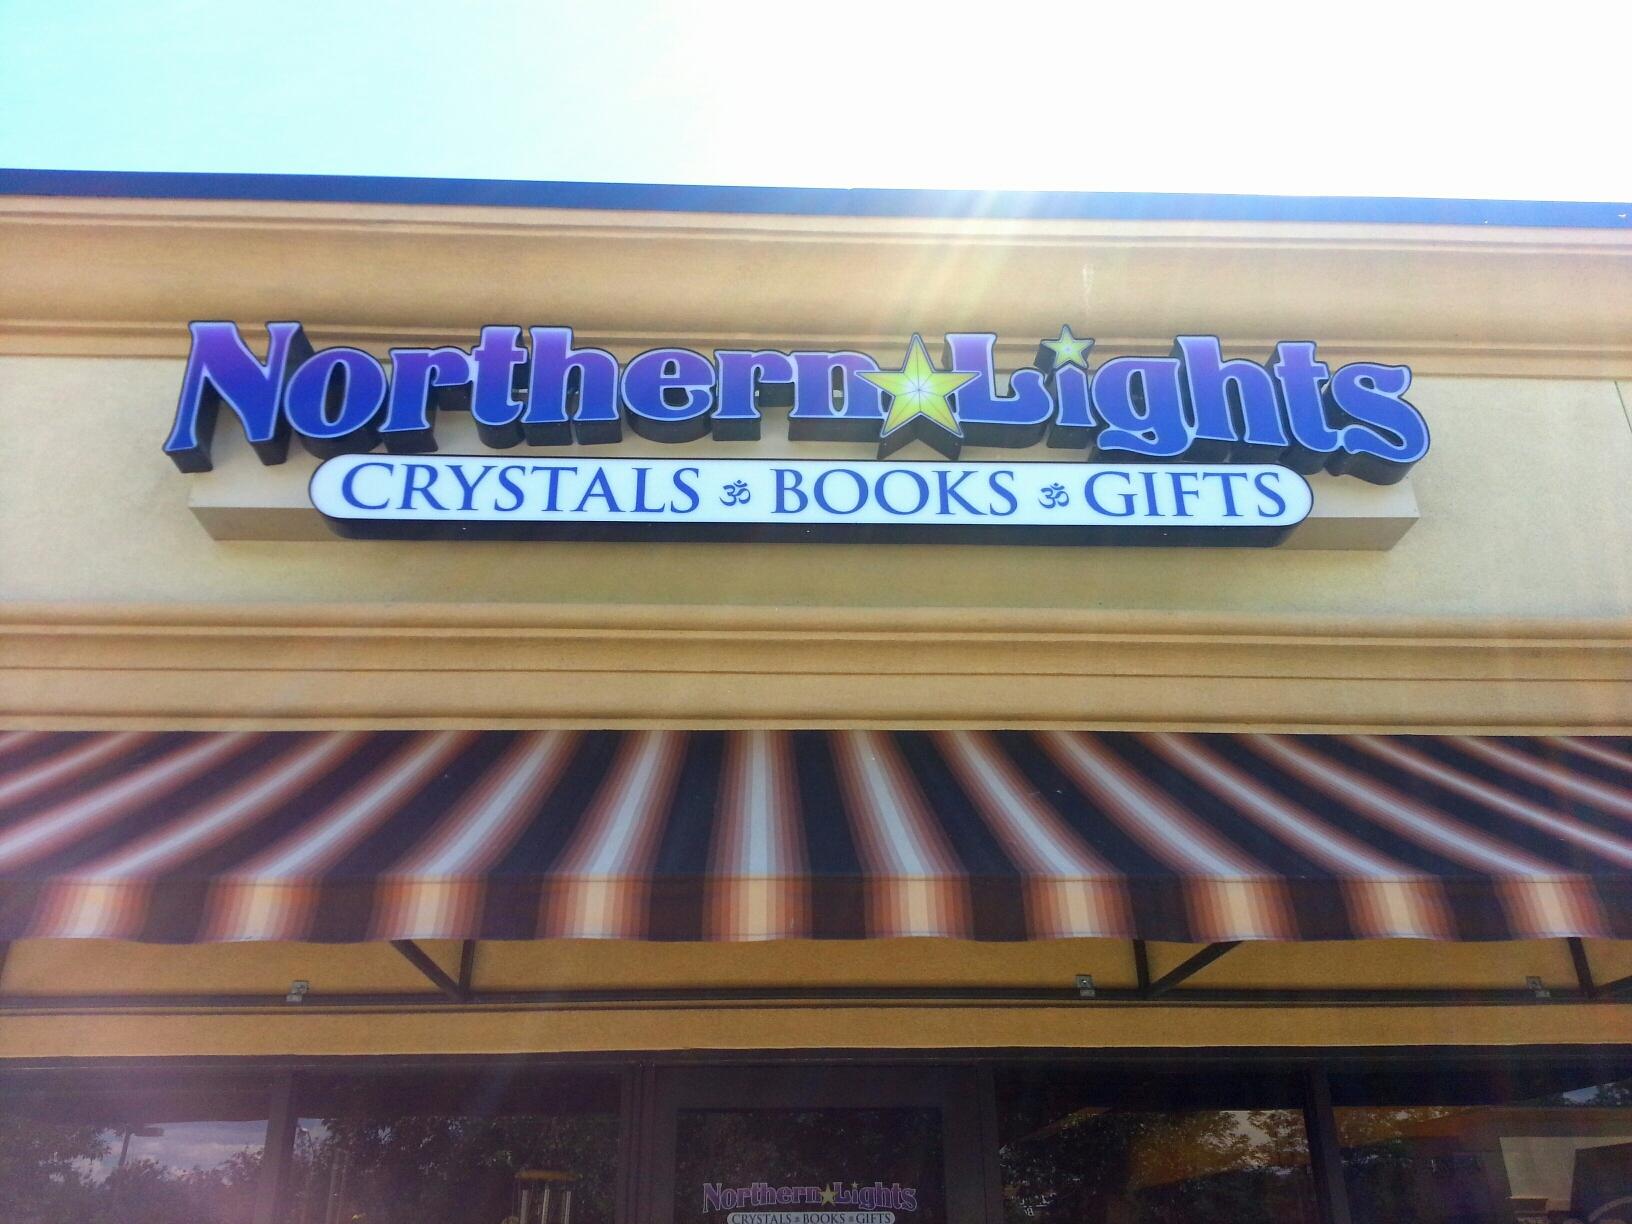 Northern Lights Crystals, Books & Gifts